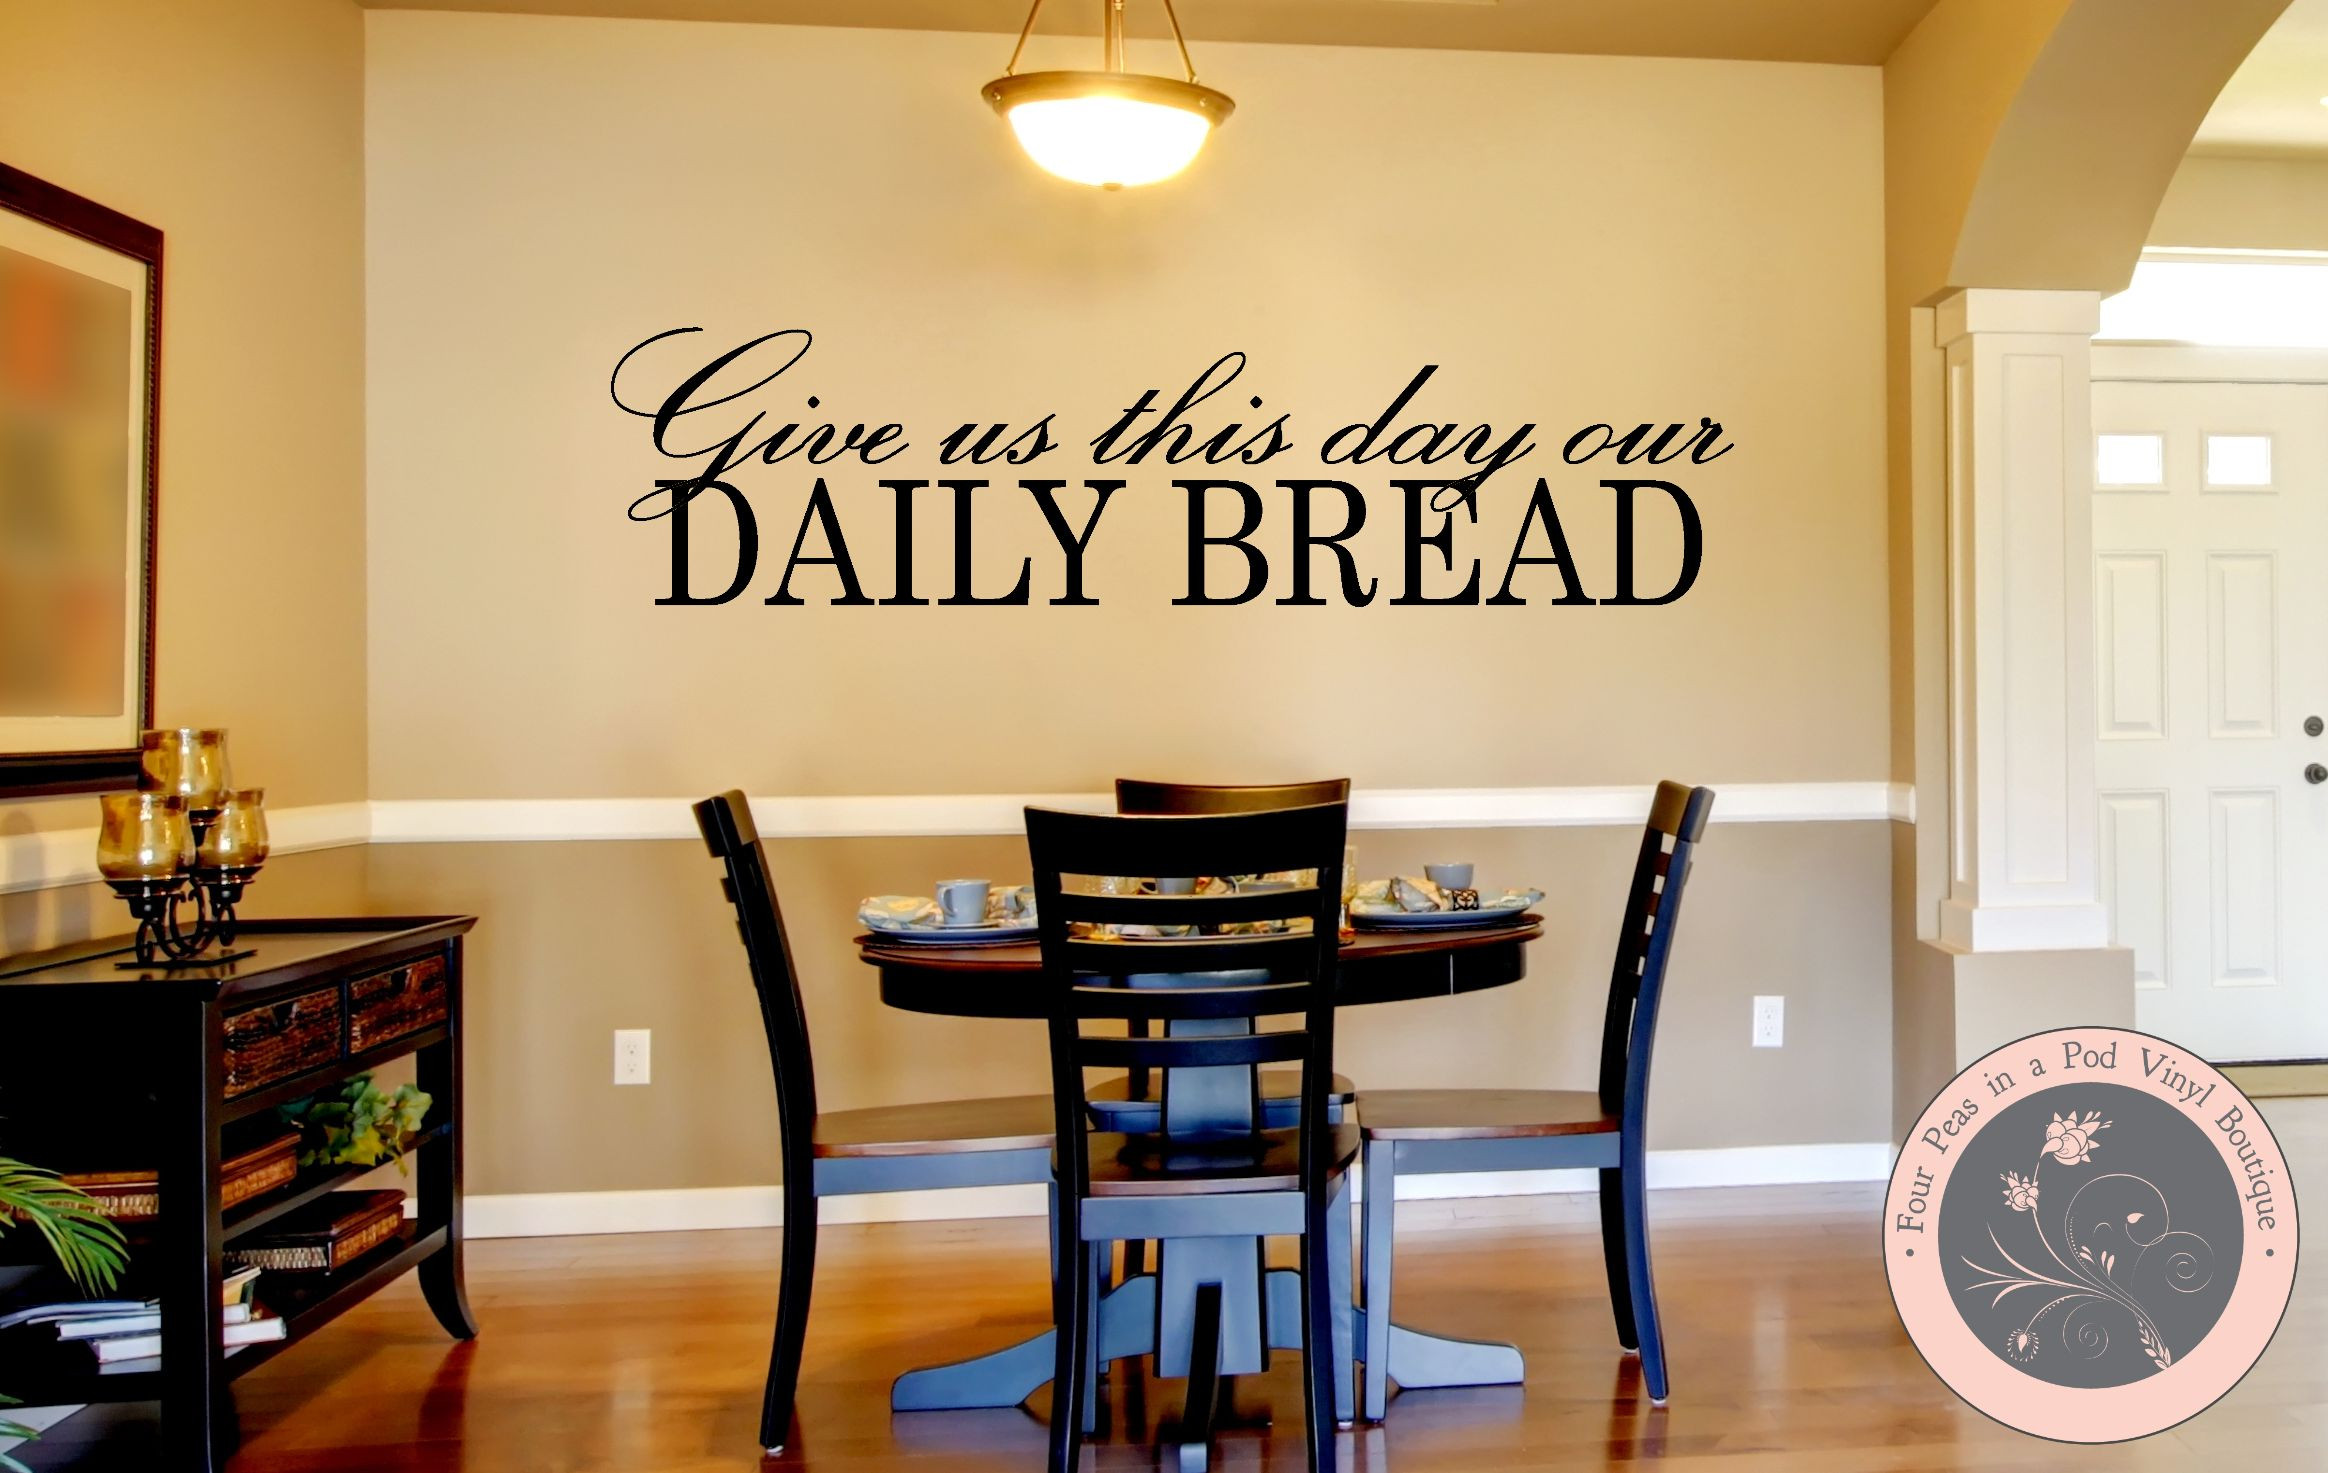 Wall Art Kitchen
 Christian Wall Decor Give Us This Day Our Daily Bread